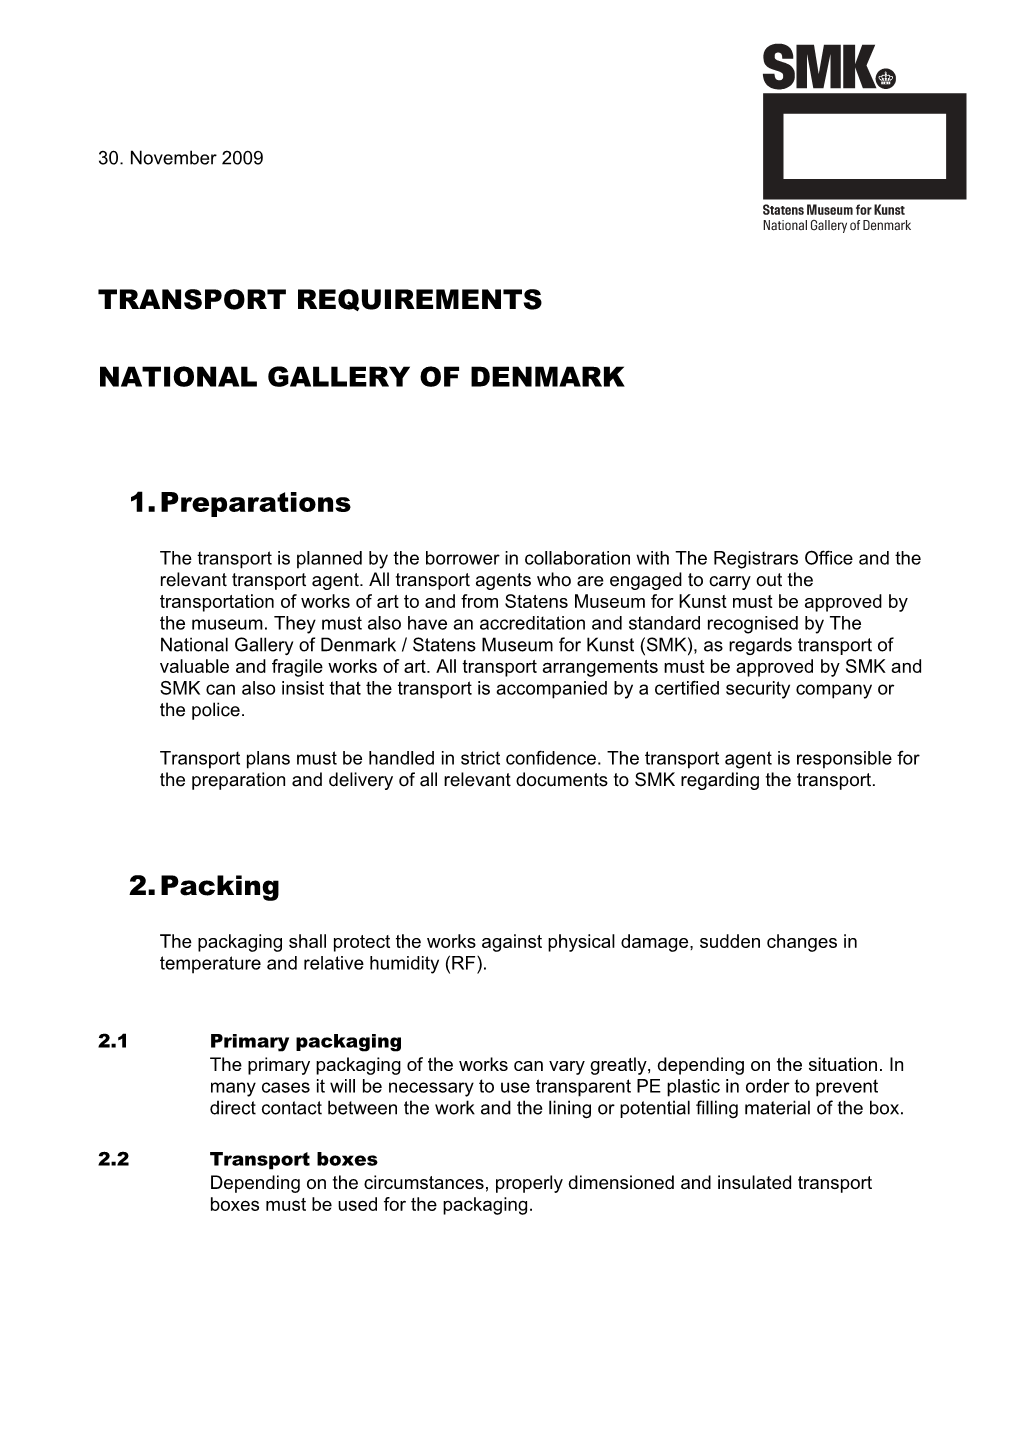 Transport Requirements